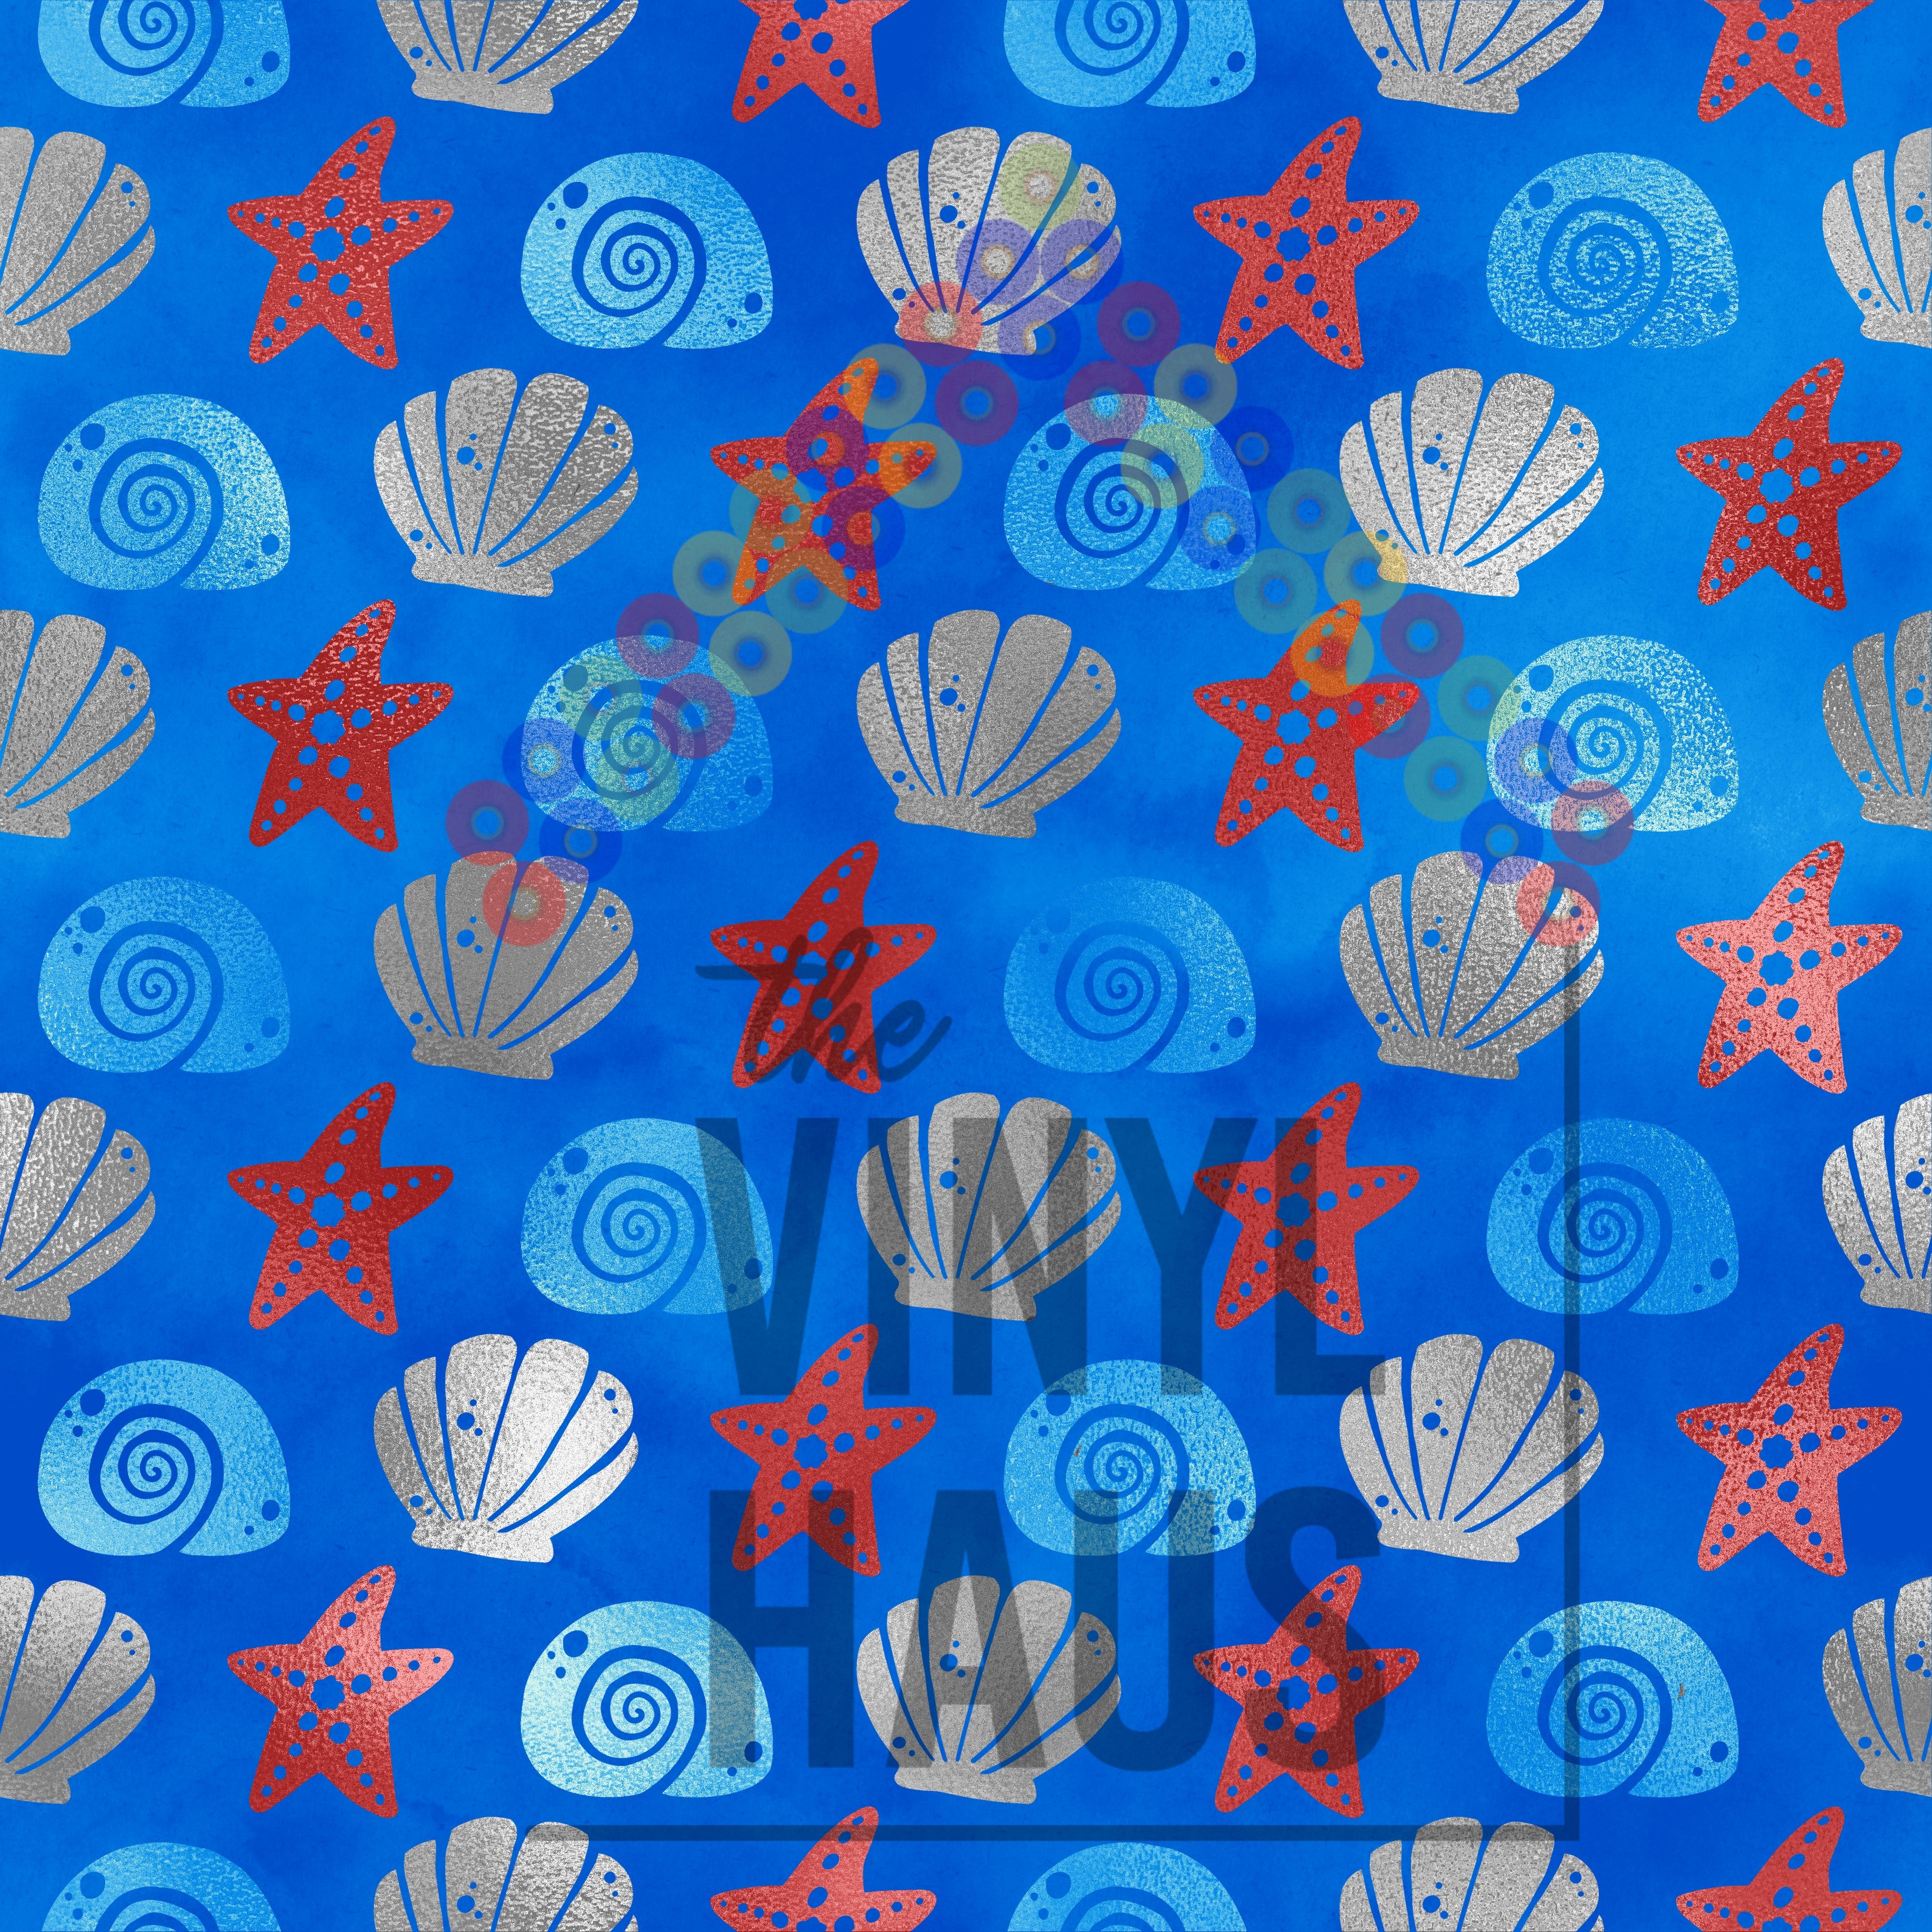 Red, White and Blue Star Fish and Shells Pattern Vinyl 12" x 12" - The Vinyl Haus